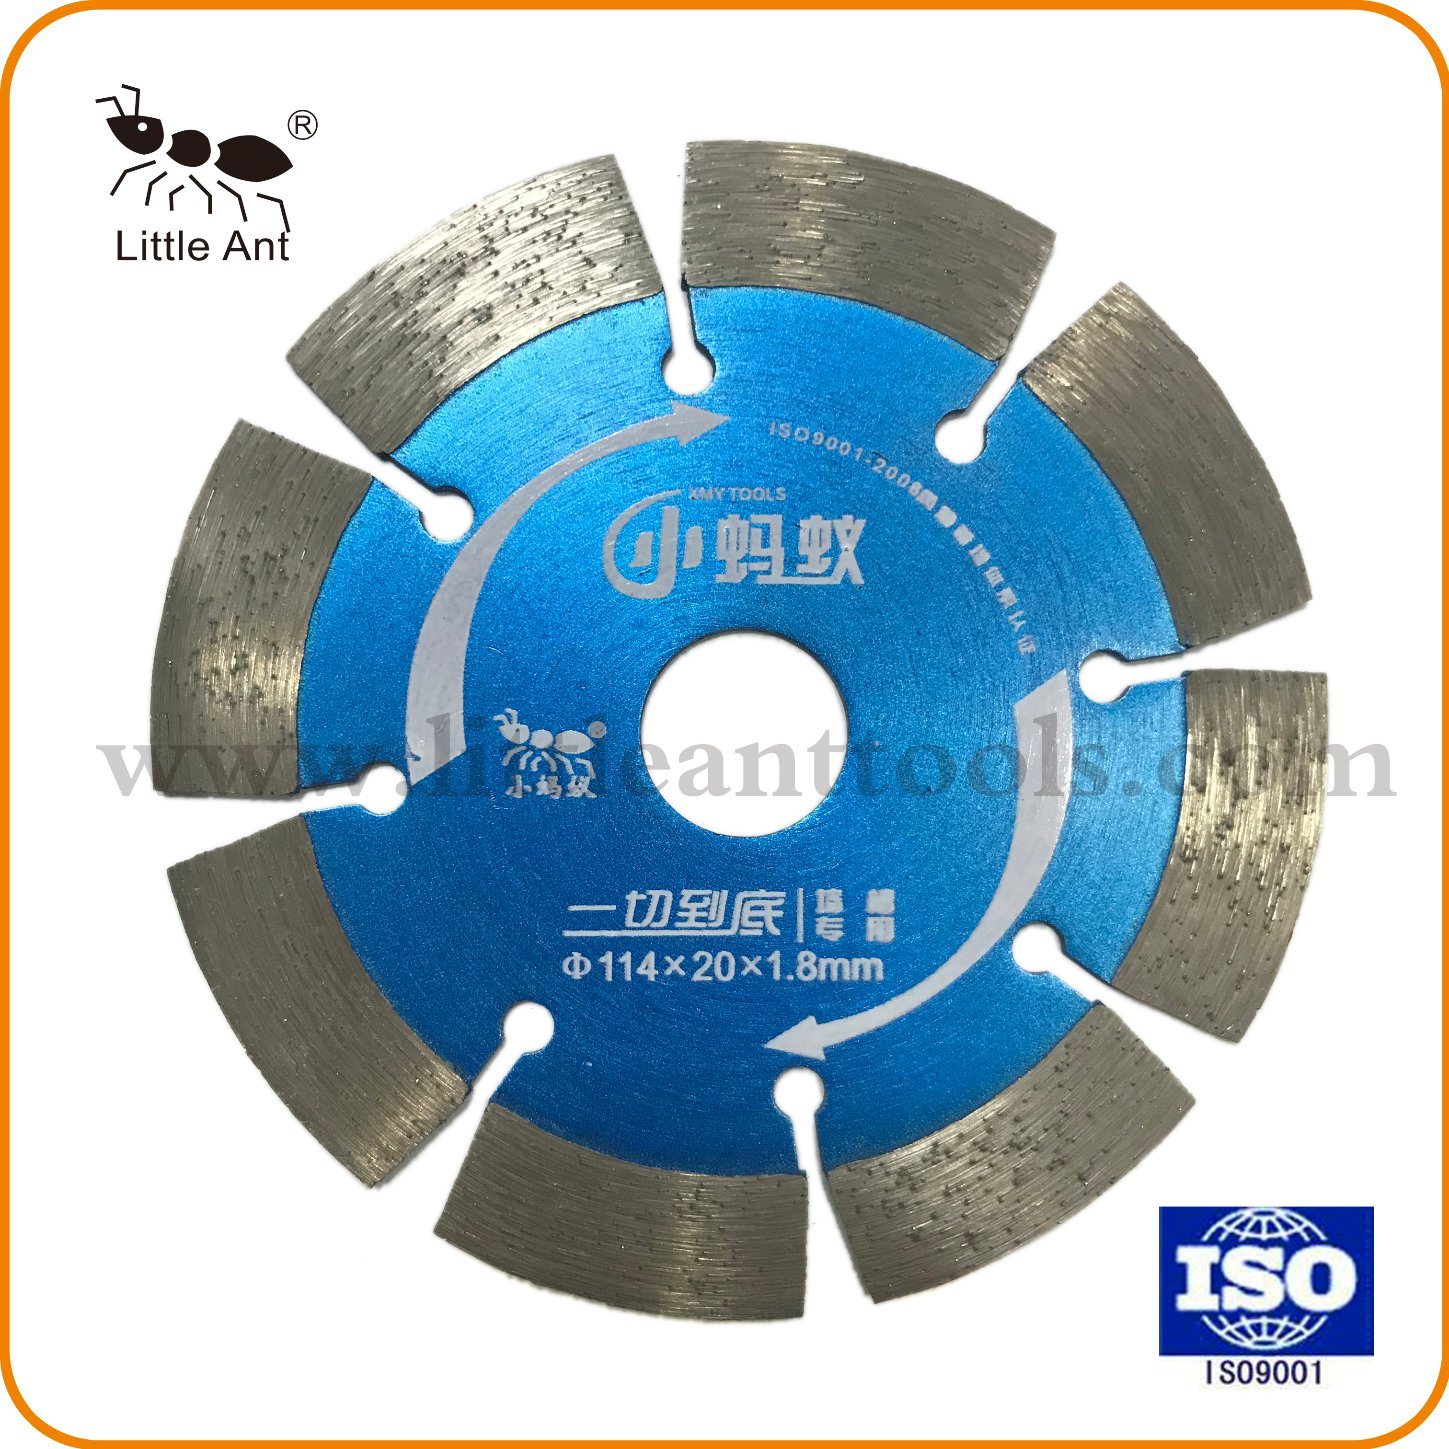 Wall Cutting Disk Hardware Tools Hot Pressed Sintered Diamond Saw Blade for Wall 4.5